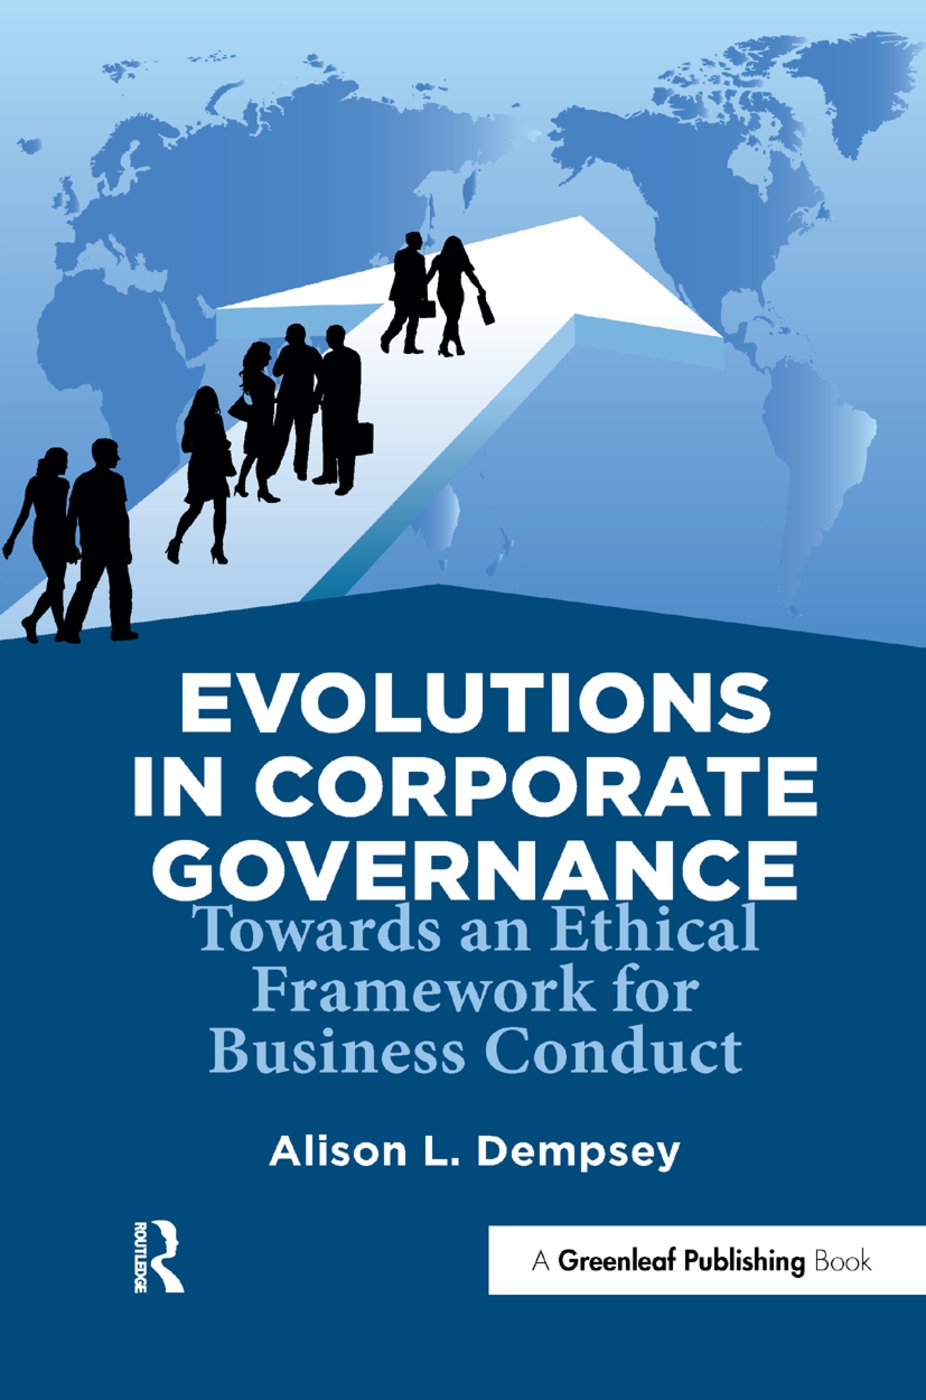 Evolutions in Corporate Governance: Towards an Ethical Framework for Business Conduct